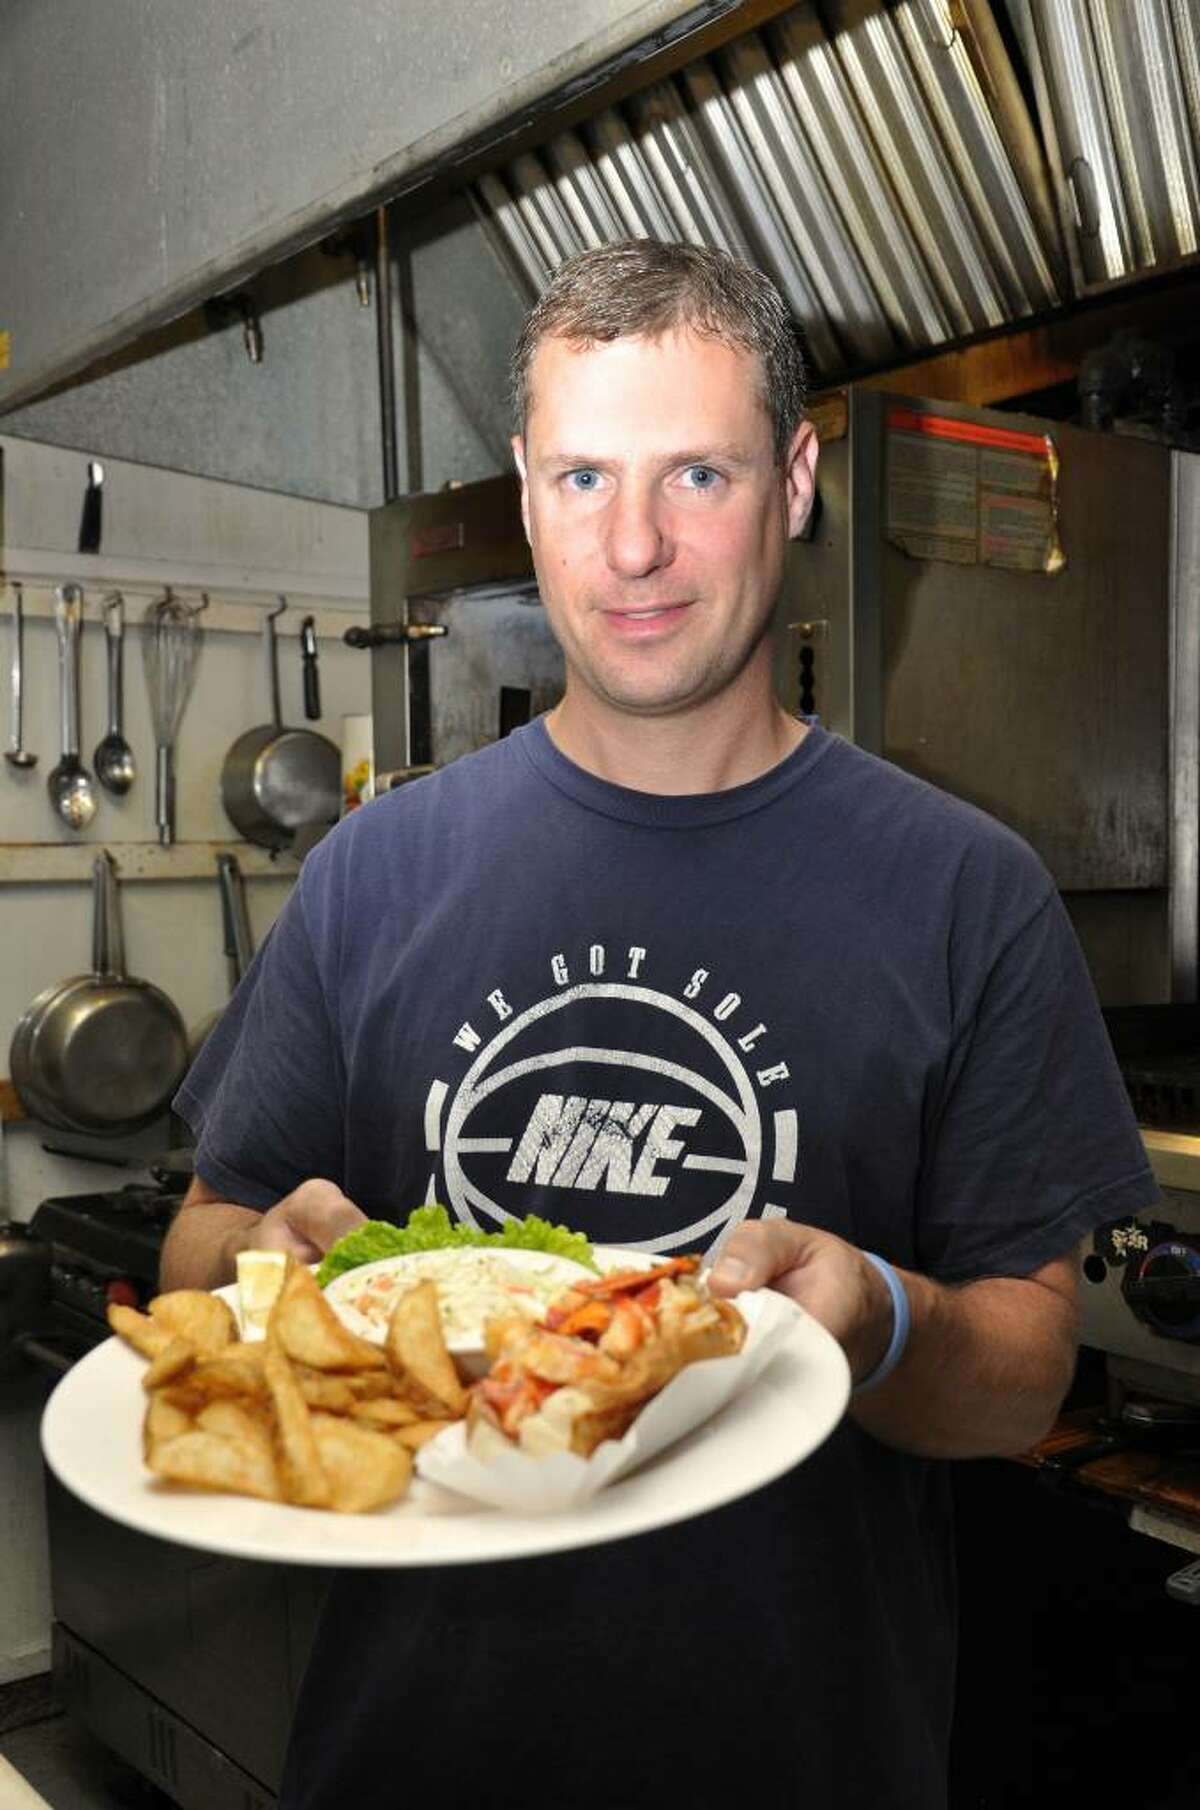 Brent Smith holds a freshly made hot lobster roll on Friday, June 11, 2010 at 7 Seas Restaurant in Milford. Most agree that 7 Seas Restaurant located at 16 New Haven Avenue in Milford makes the best hot lobster roll.